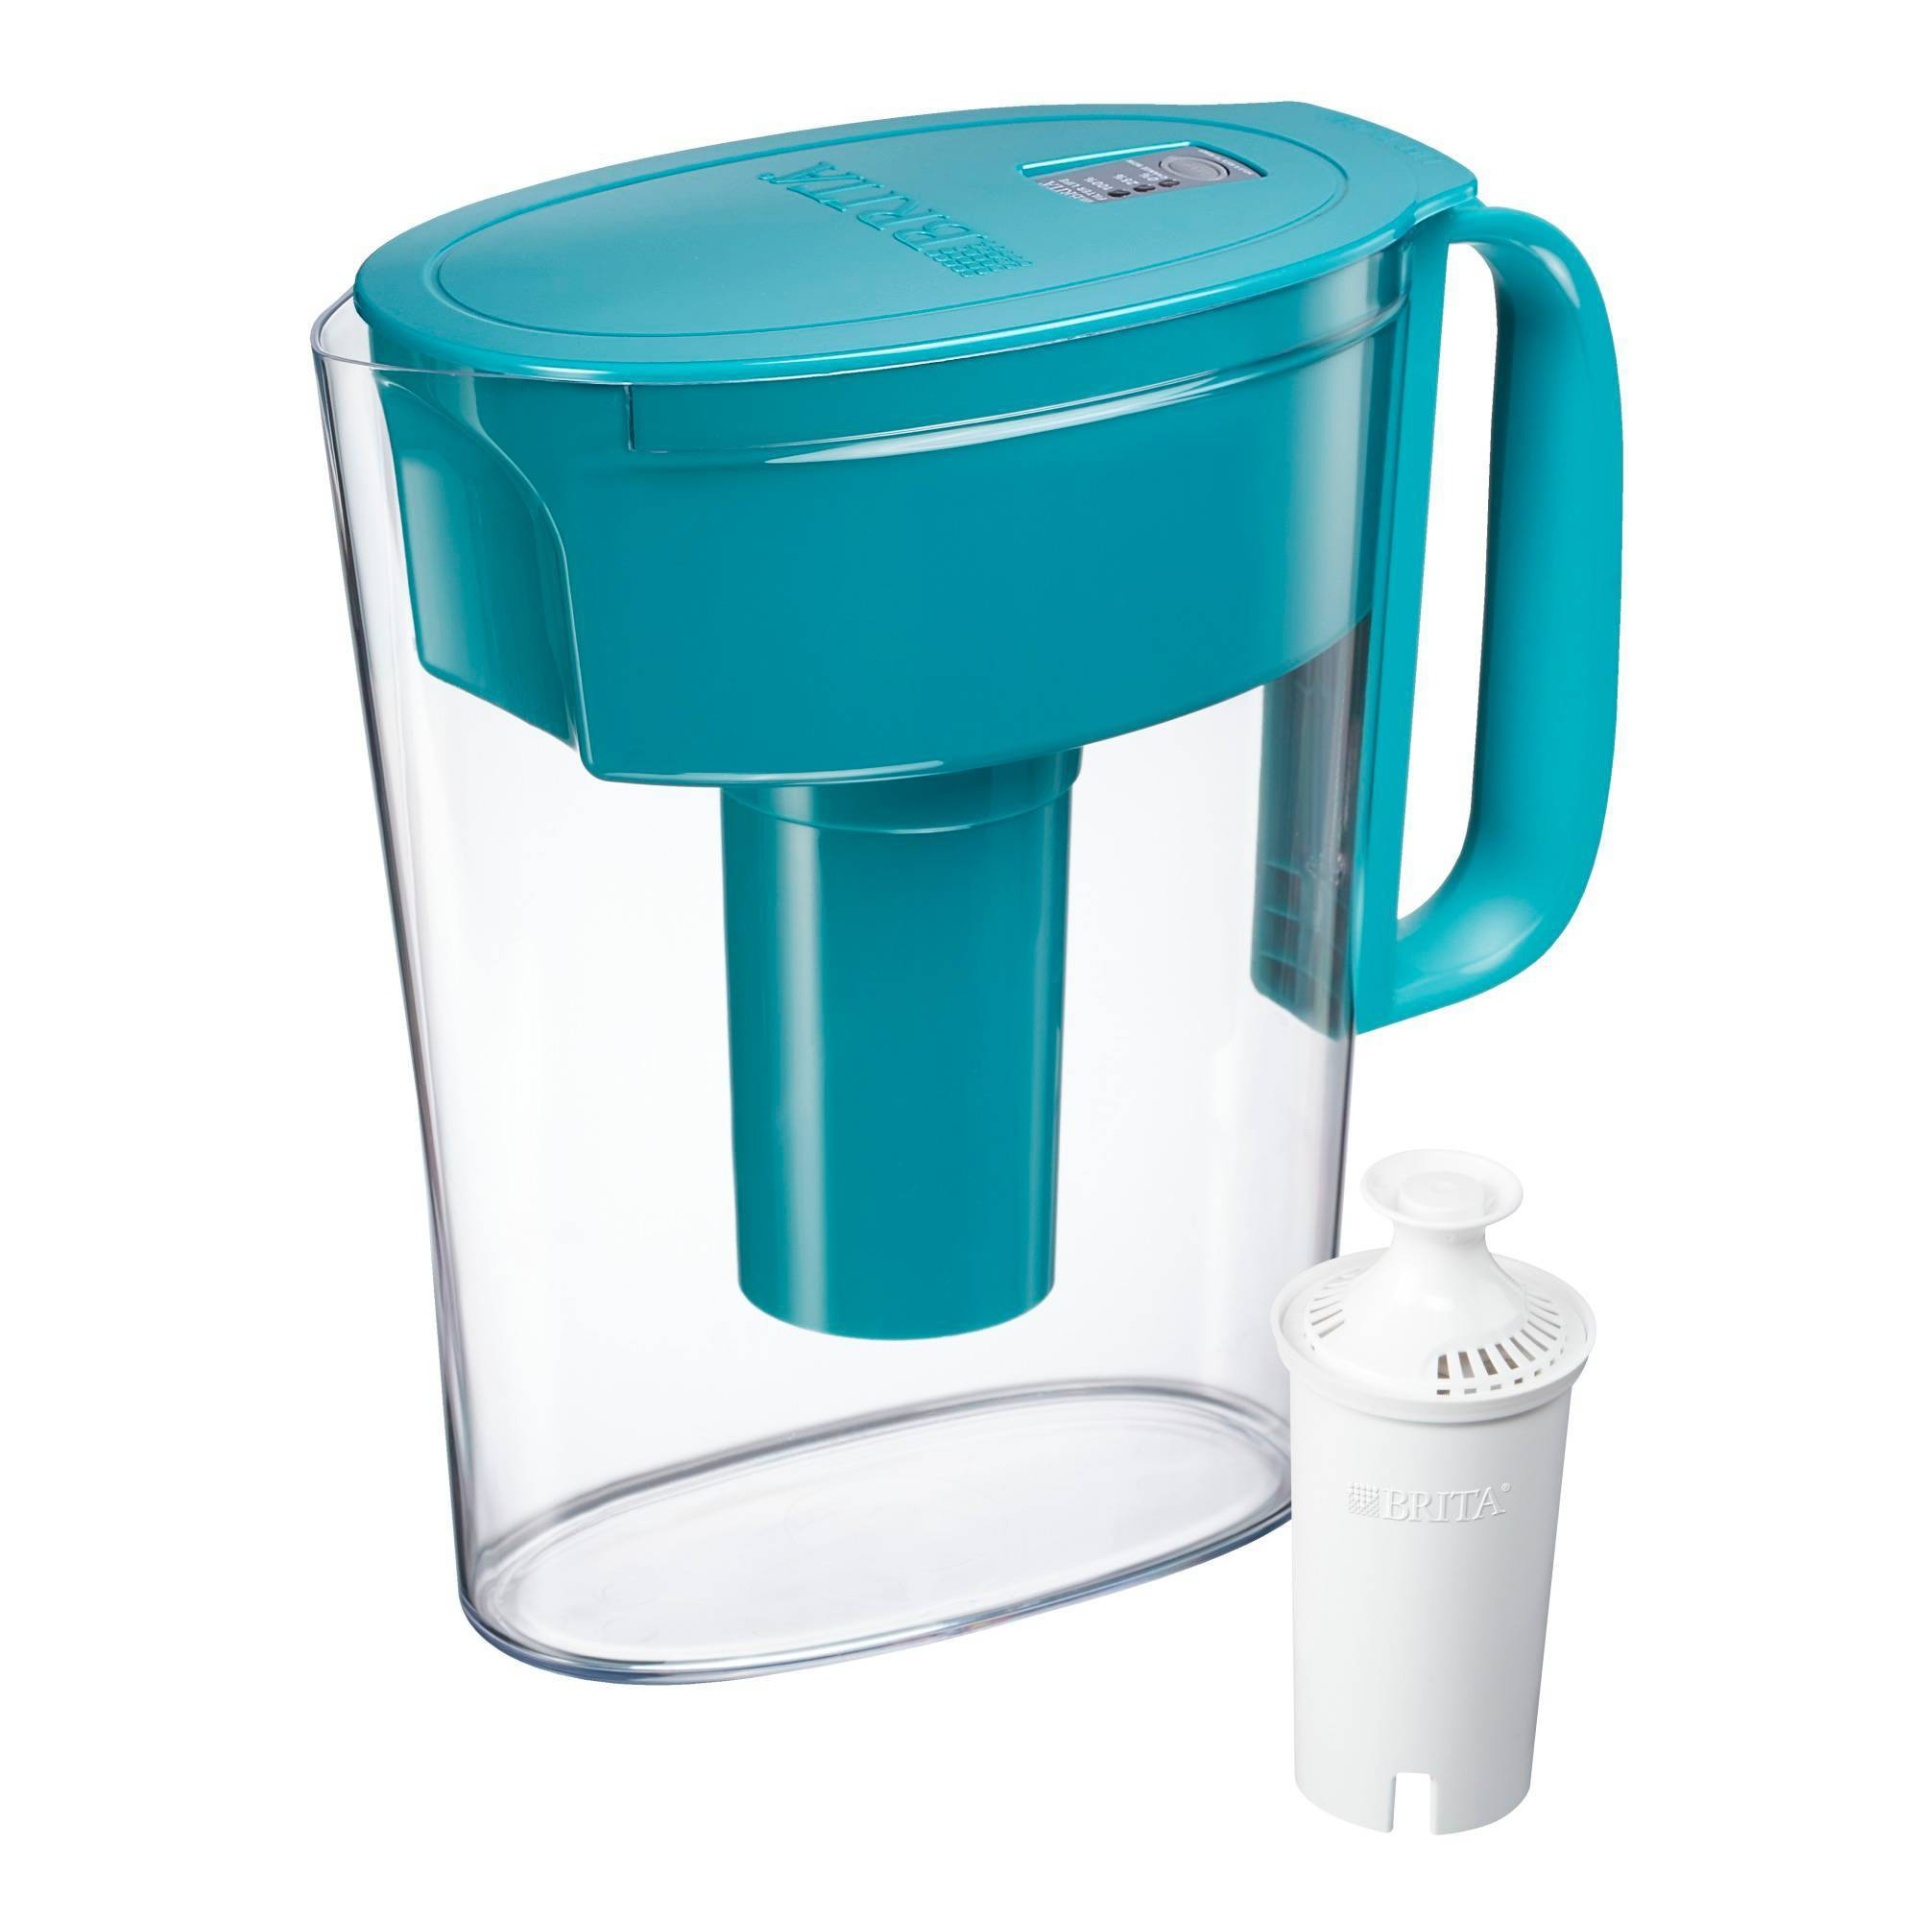 slide 1 of 6, Brita Water Filter 6-Cup Metro Water Pitcher Dispenser with Standard Water Filter - Turquoise, 1 ct